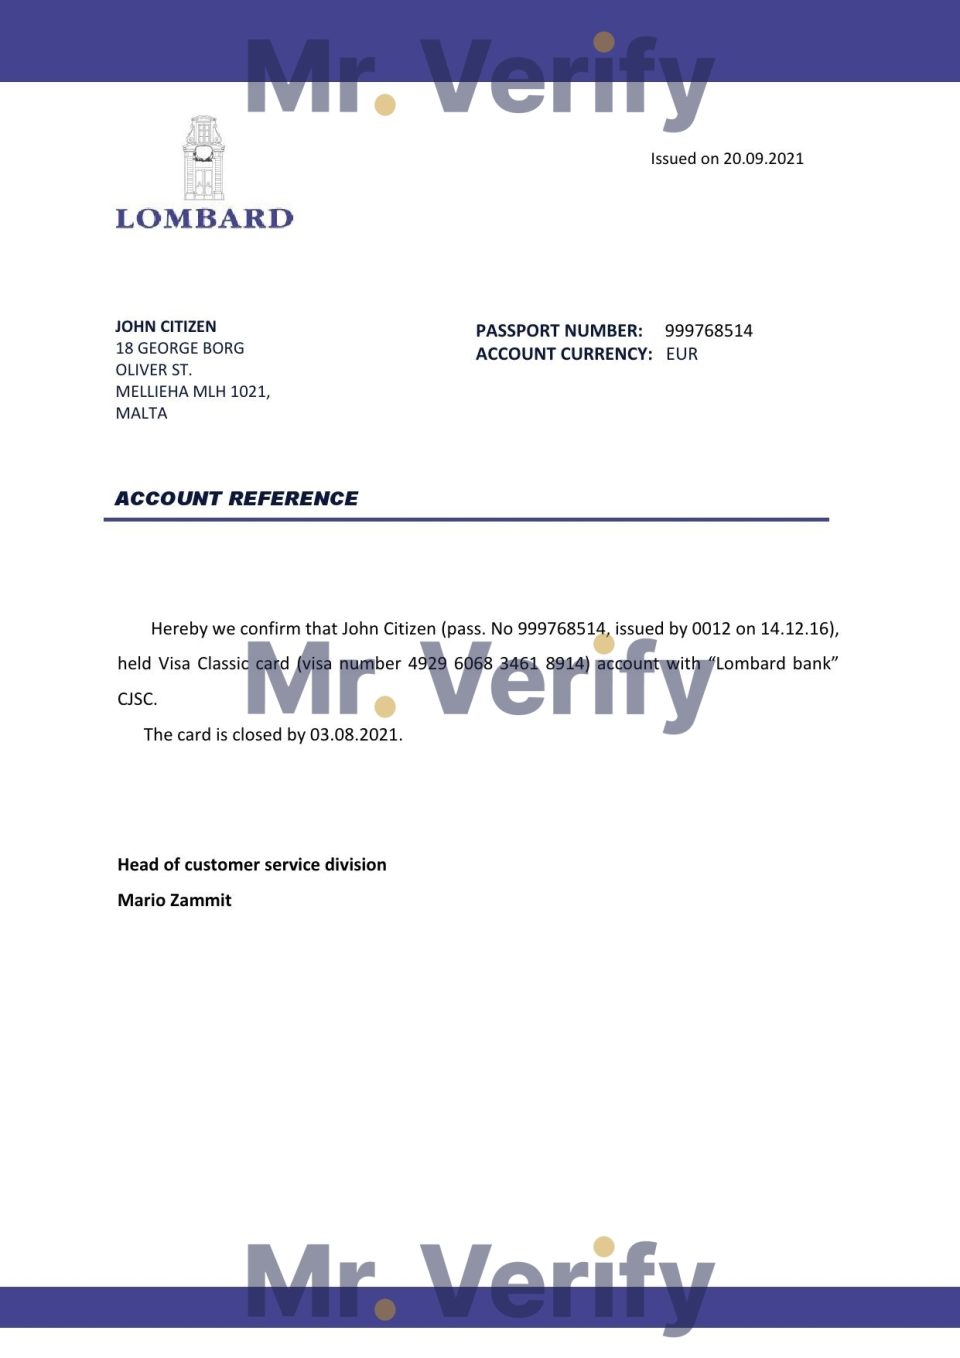 Download Malta Lombard Bank Reference Letter Templates | Editable Word